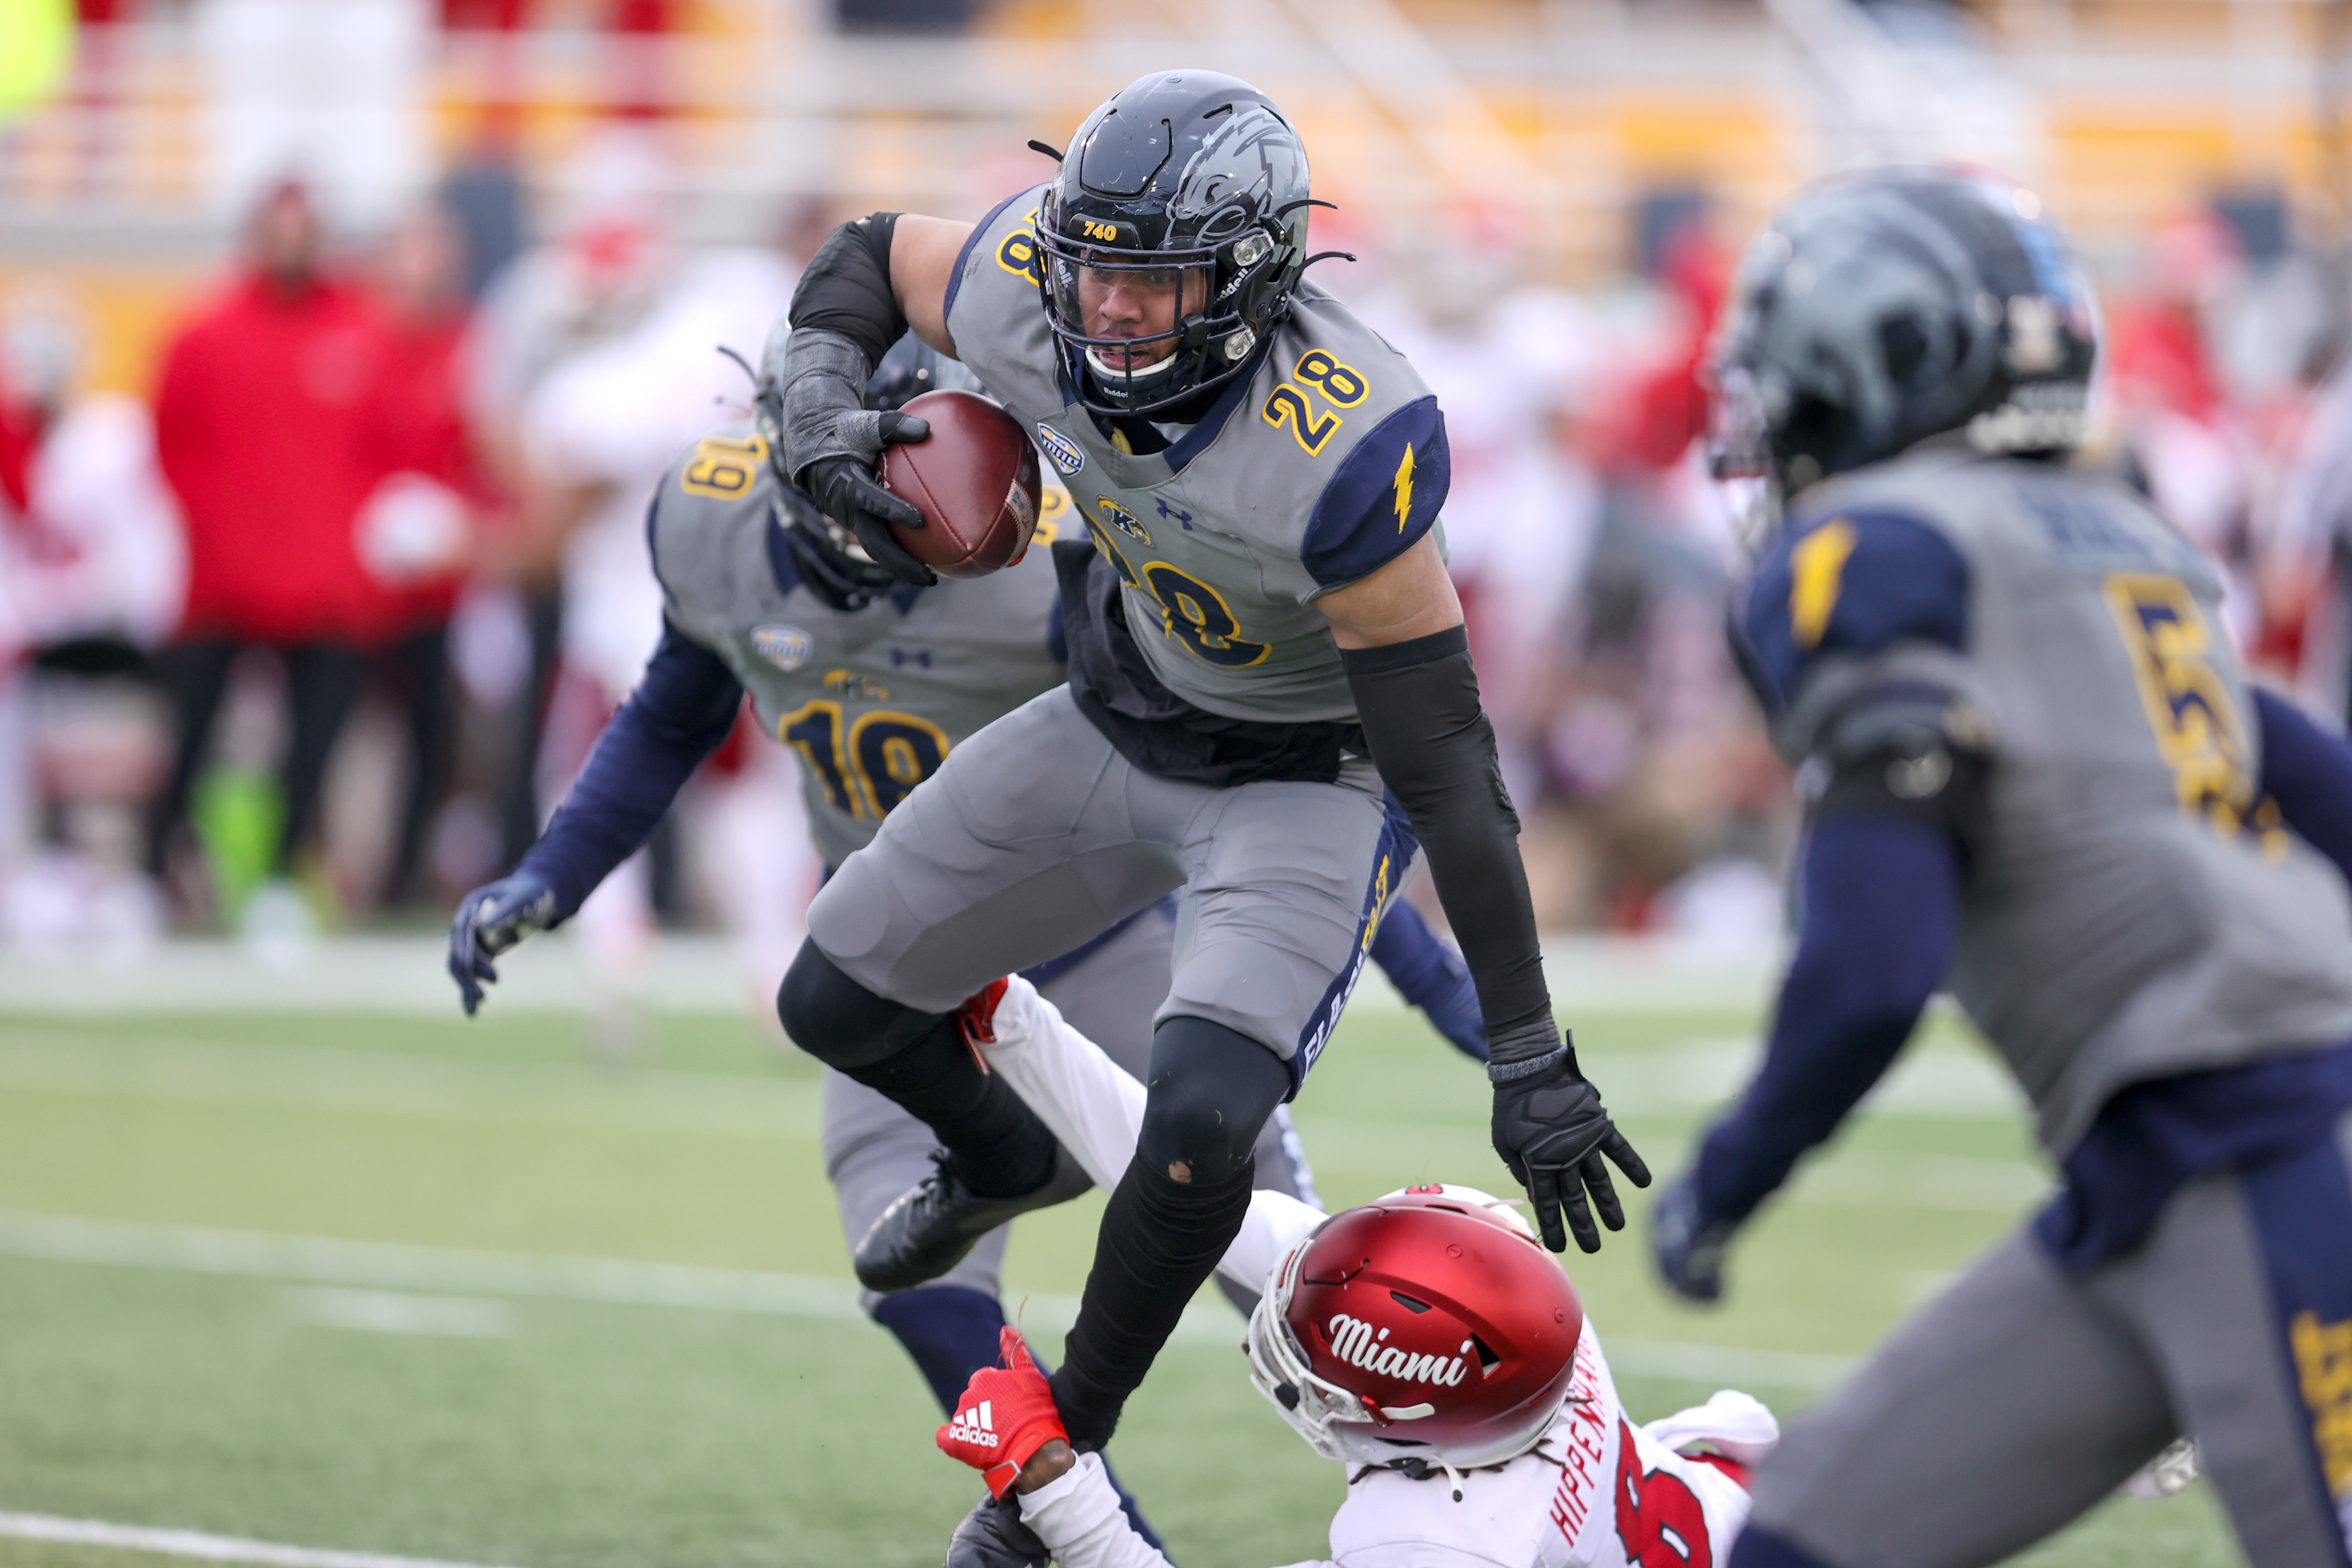 COLLEGE FOOTBALL: NOV 27 Miami OH at Kent State